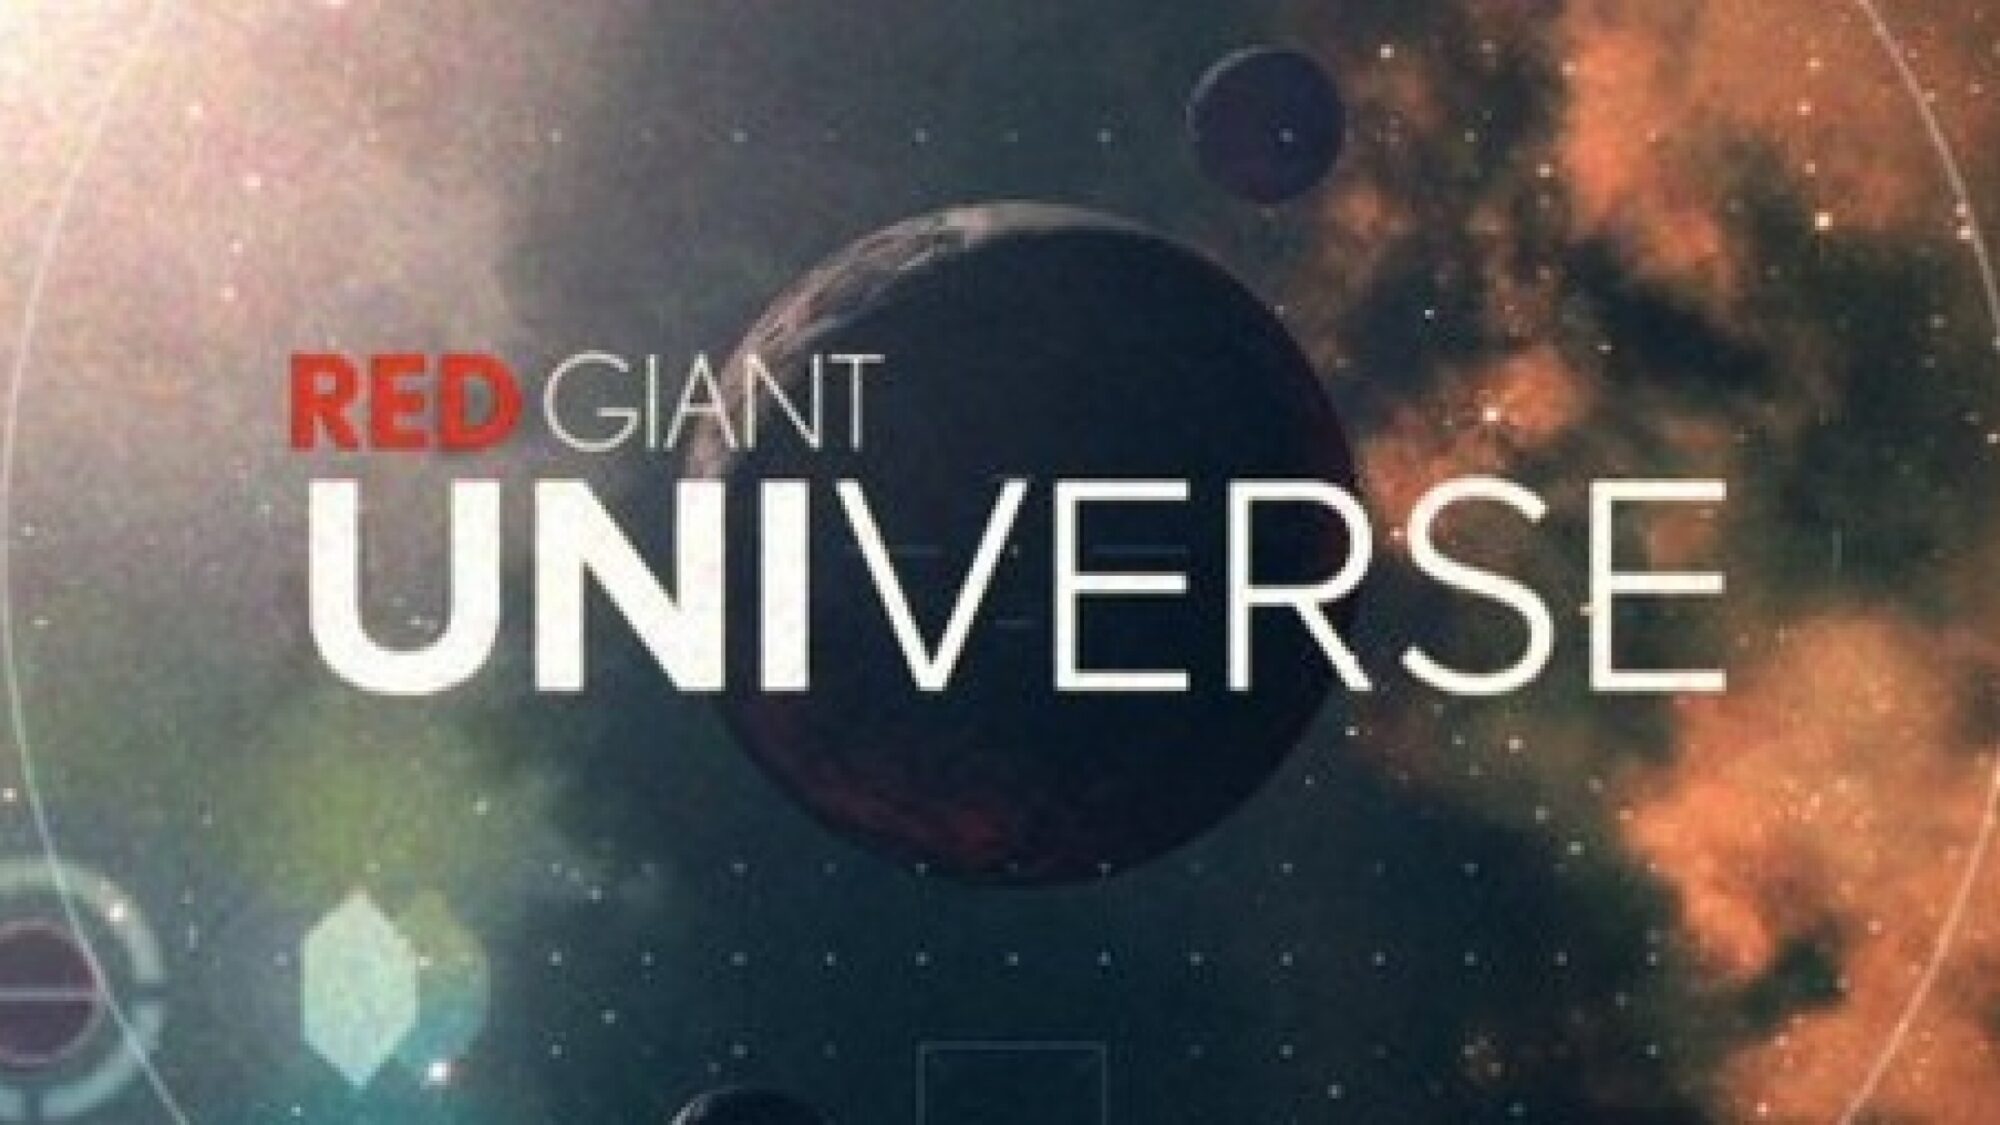 Red Giant Universe 6.0.0 (x64)